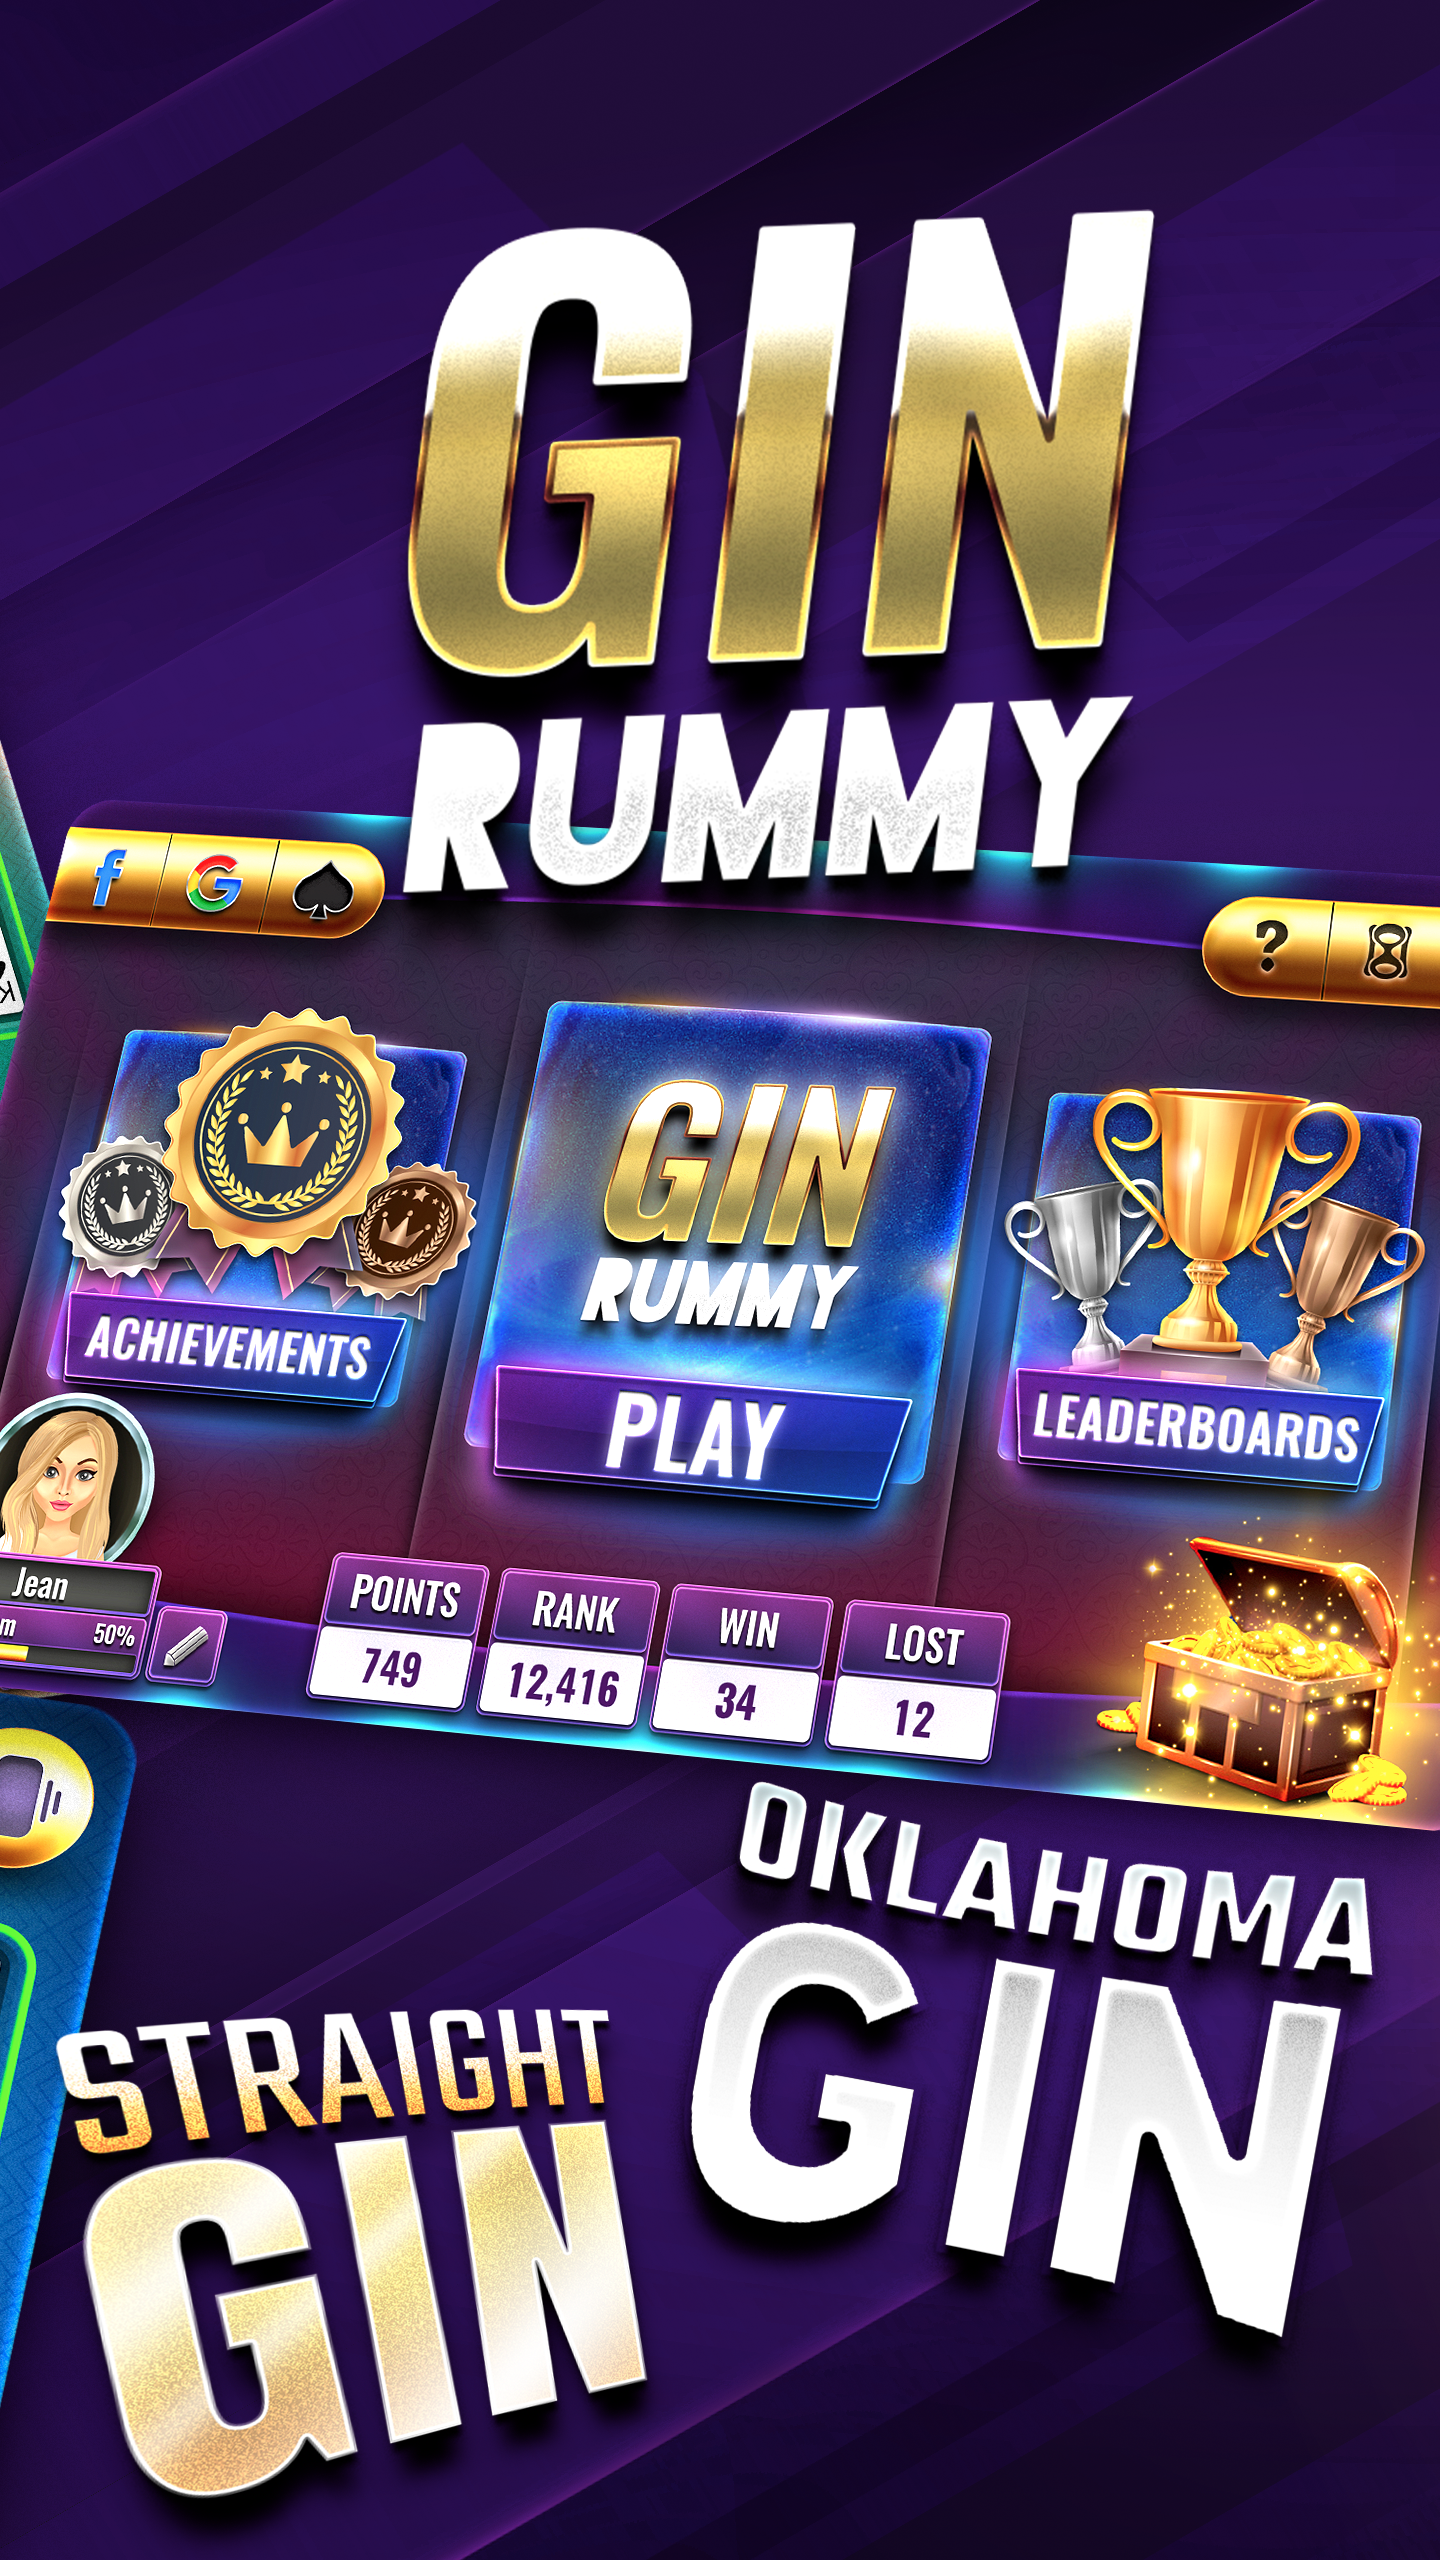 Play Rummy online for free